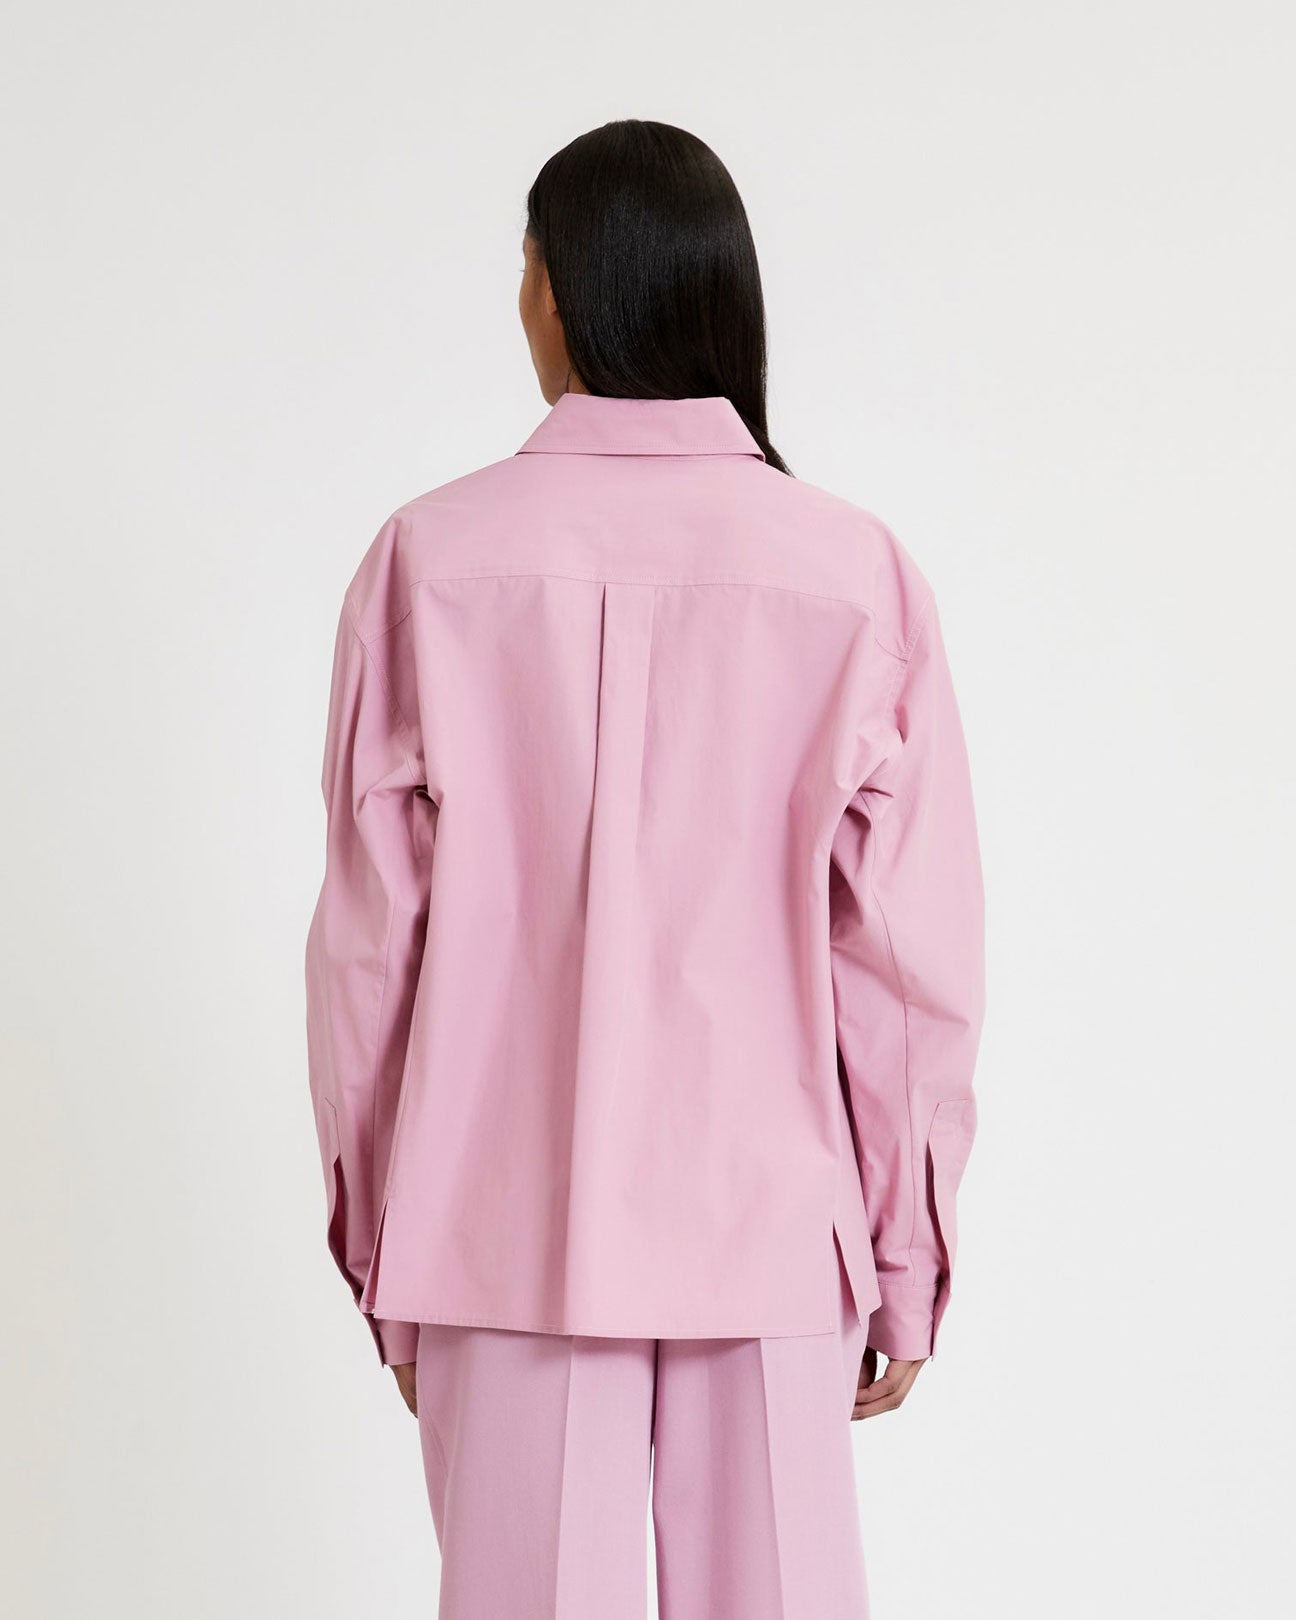 AKNVAS Cassie Shirt in Pink available at Lahn.shop